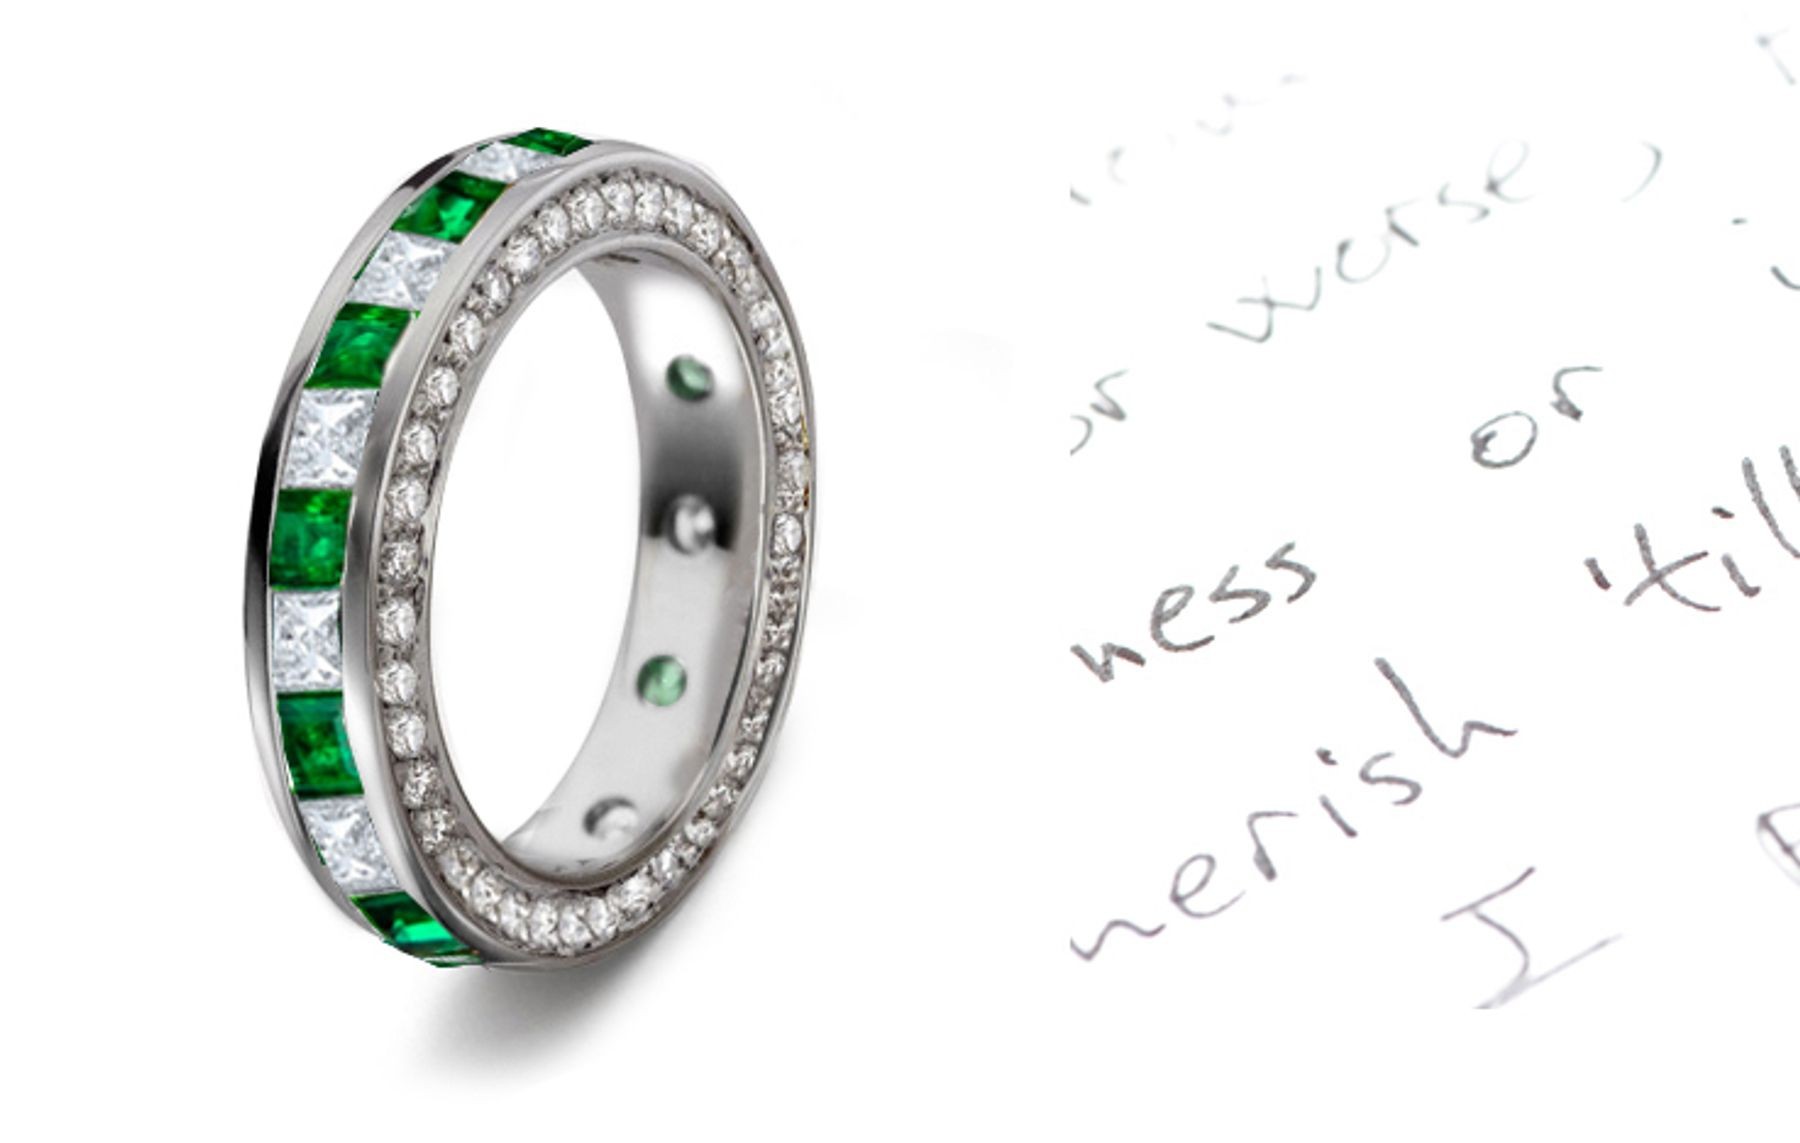 The Lore of Gemstones: A Princess Cut Diamond & Square Emerald Ring in Gold